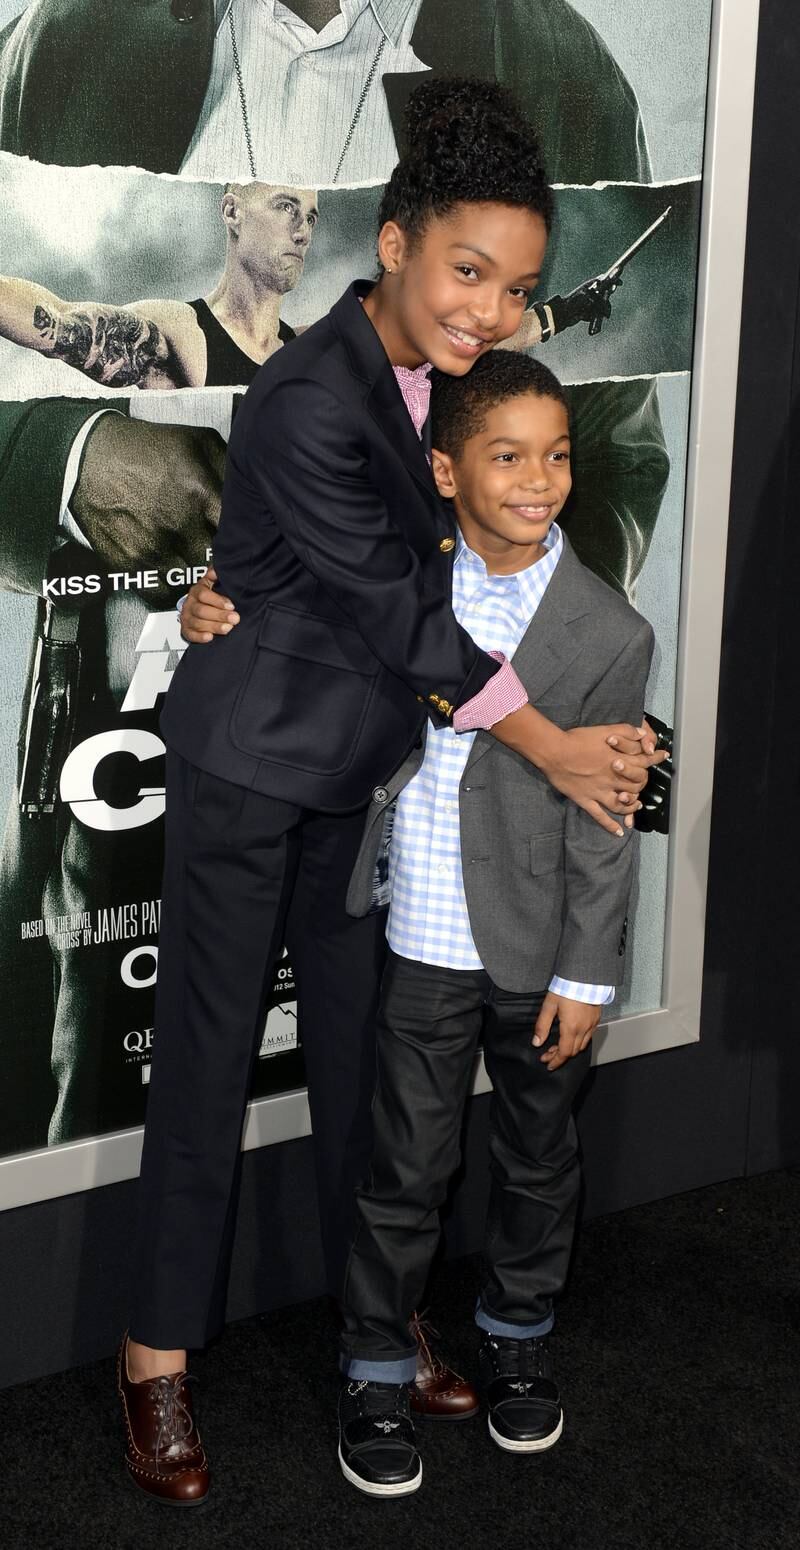 Yara Shahidi wears a trouser and blazer set to attend the 'Alex Cross' premiere with her brother Sayeed Shahidi on October 15, 2012. EPA